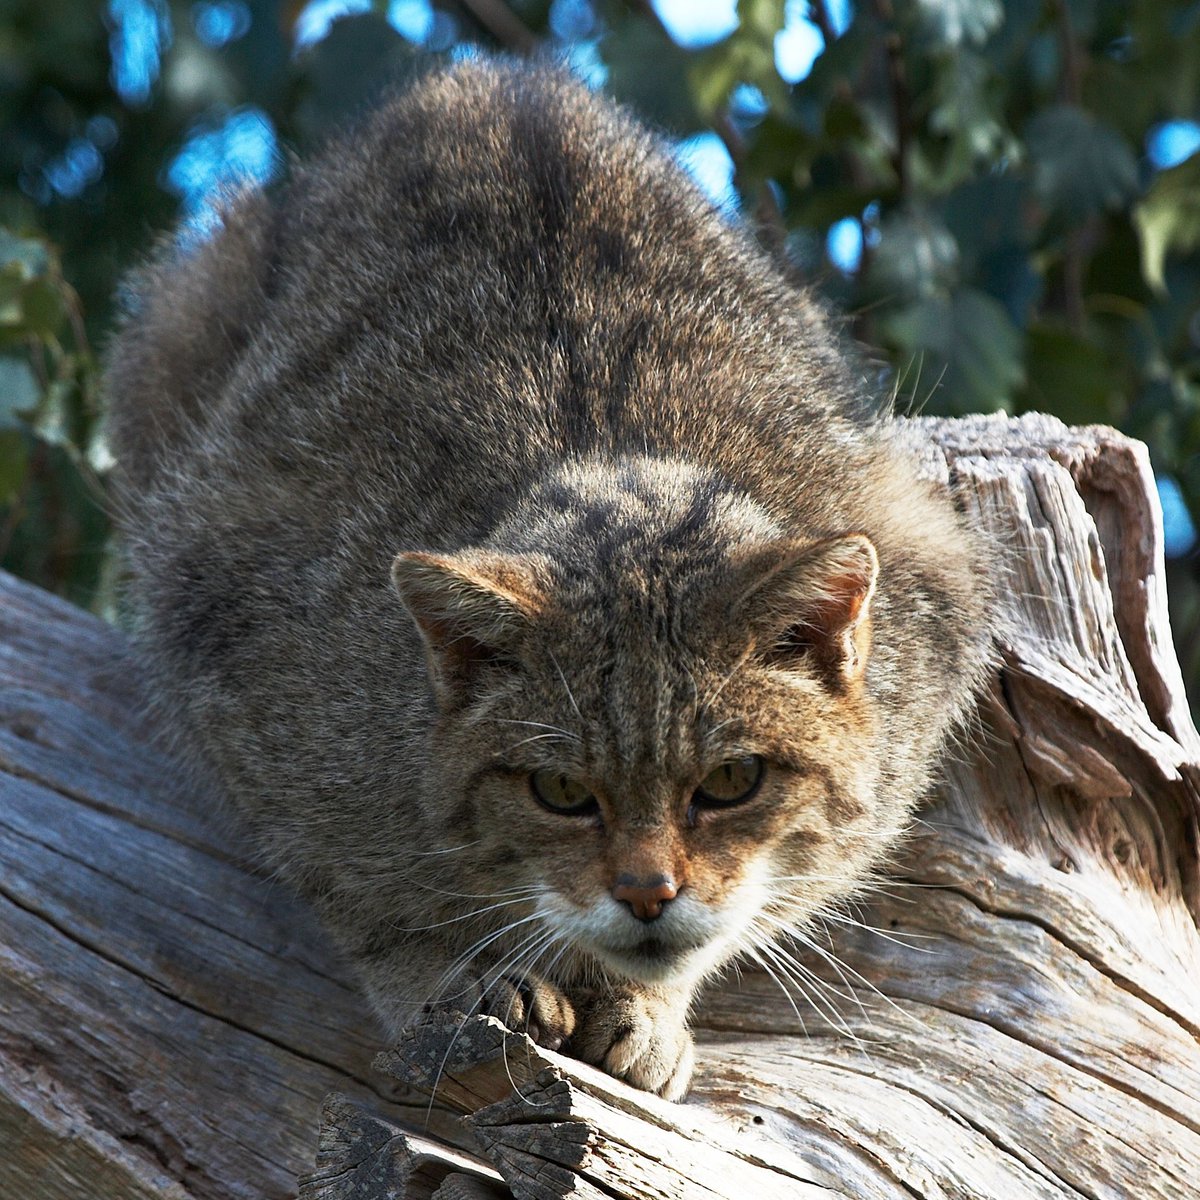 Share your thoughts! 📢 @UniofExeter has launched a survey to better understand public attitudes to the possible reintroduction of wildcats in the South West. All residents in the South West are invited to take part 👉 buff.ly/49LWnVr